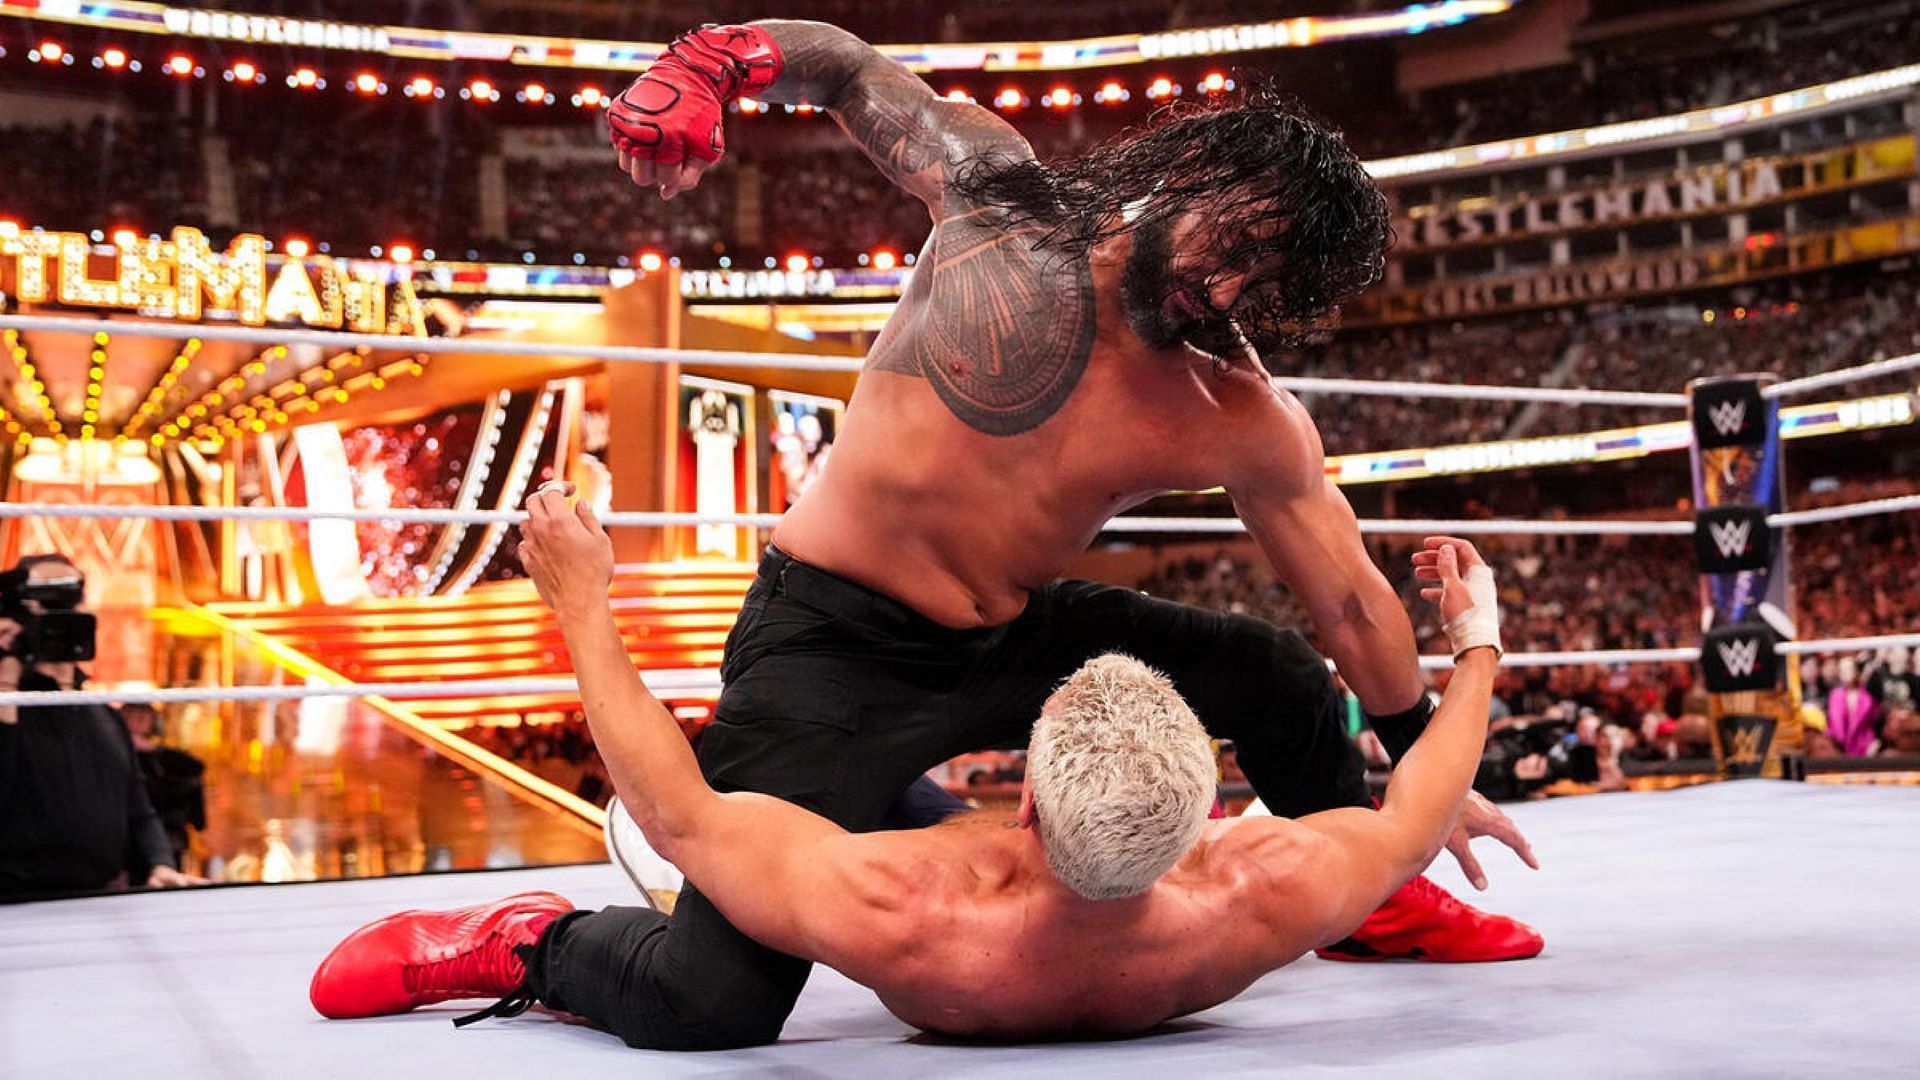 Fans hoping for a title change at WrestleMania 39 were left disappointed.